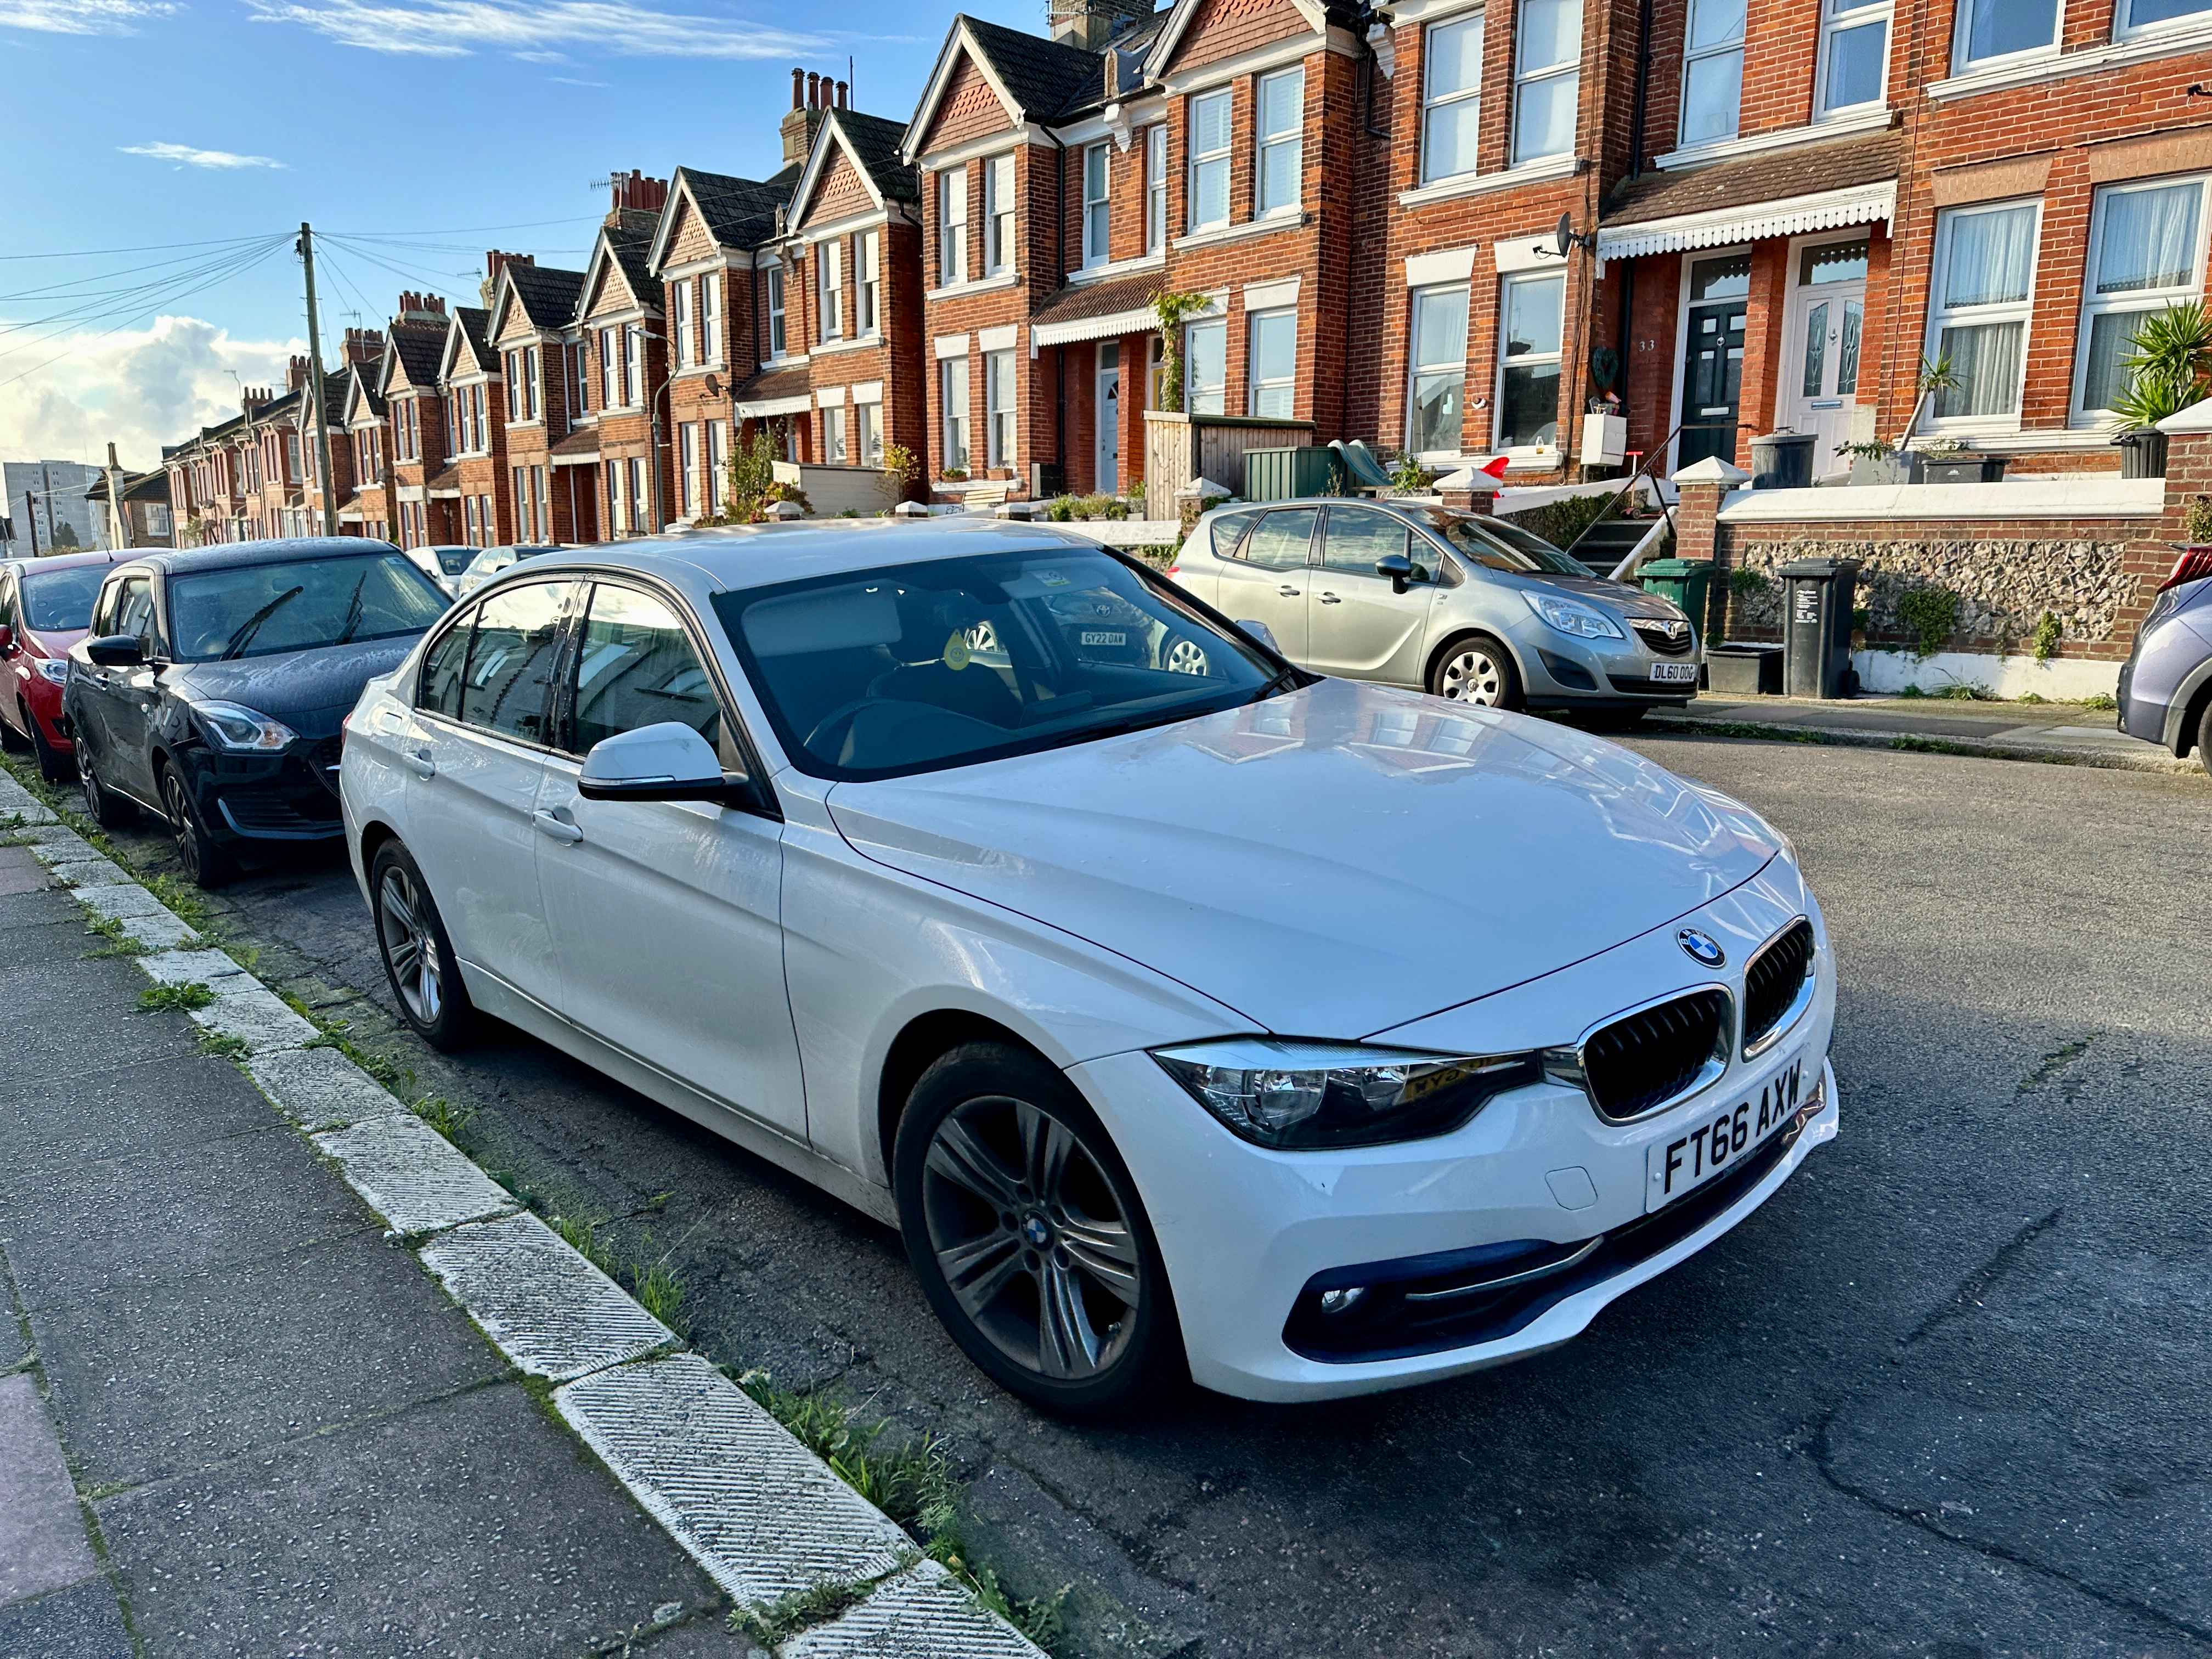 Photograph of FT66 AXW - a White BMW 3 Series parked in Hollingdean by a non-resident who uses the local area as part of their Brighton commute. The fourth of seven photographs supplied by the residents of Hollingdean.